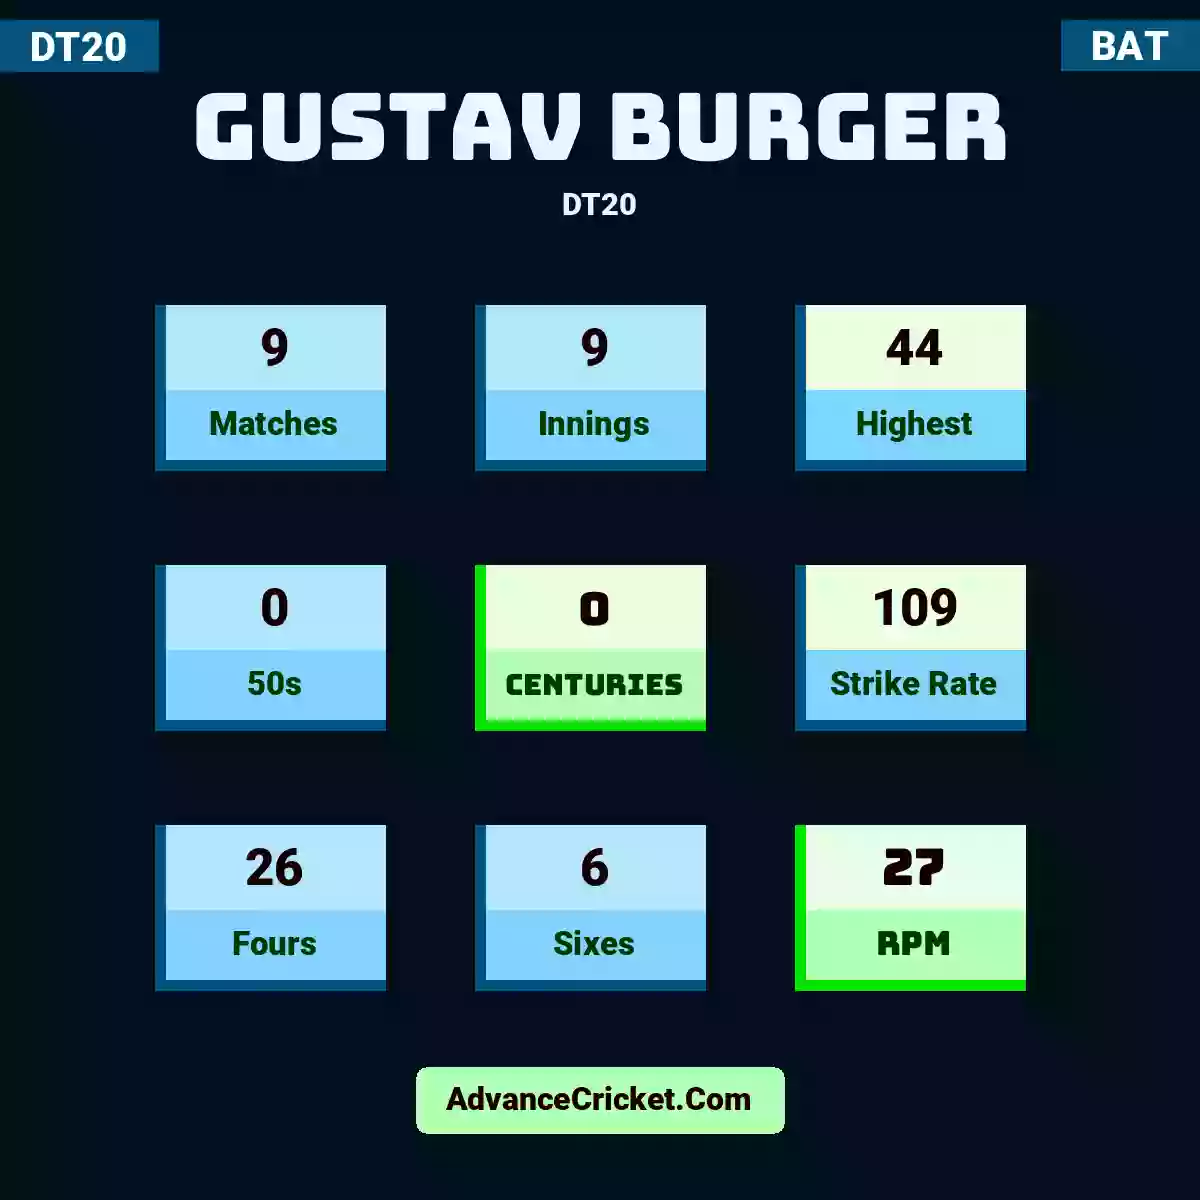 Gustav Burger DT20 , Gustav Burger played 9 matches, scored 44 runs as highest, 0 half-centuries, and 0 centuries, with a strike rate of 109. G.Burger hit 26 fours and 6 sixes, with an RPM of 27.